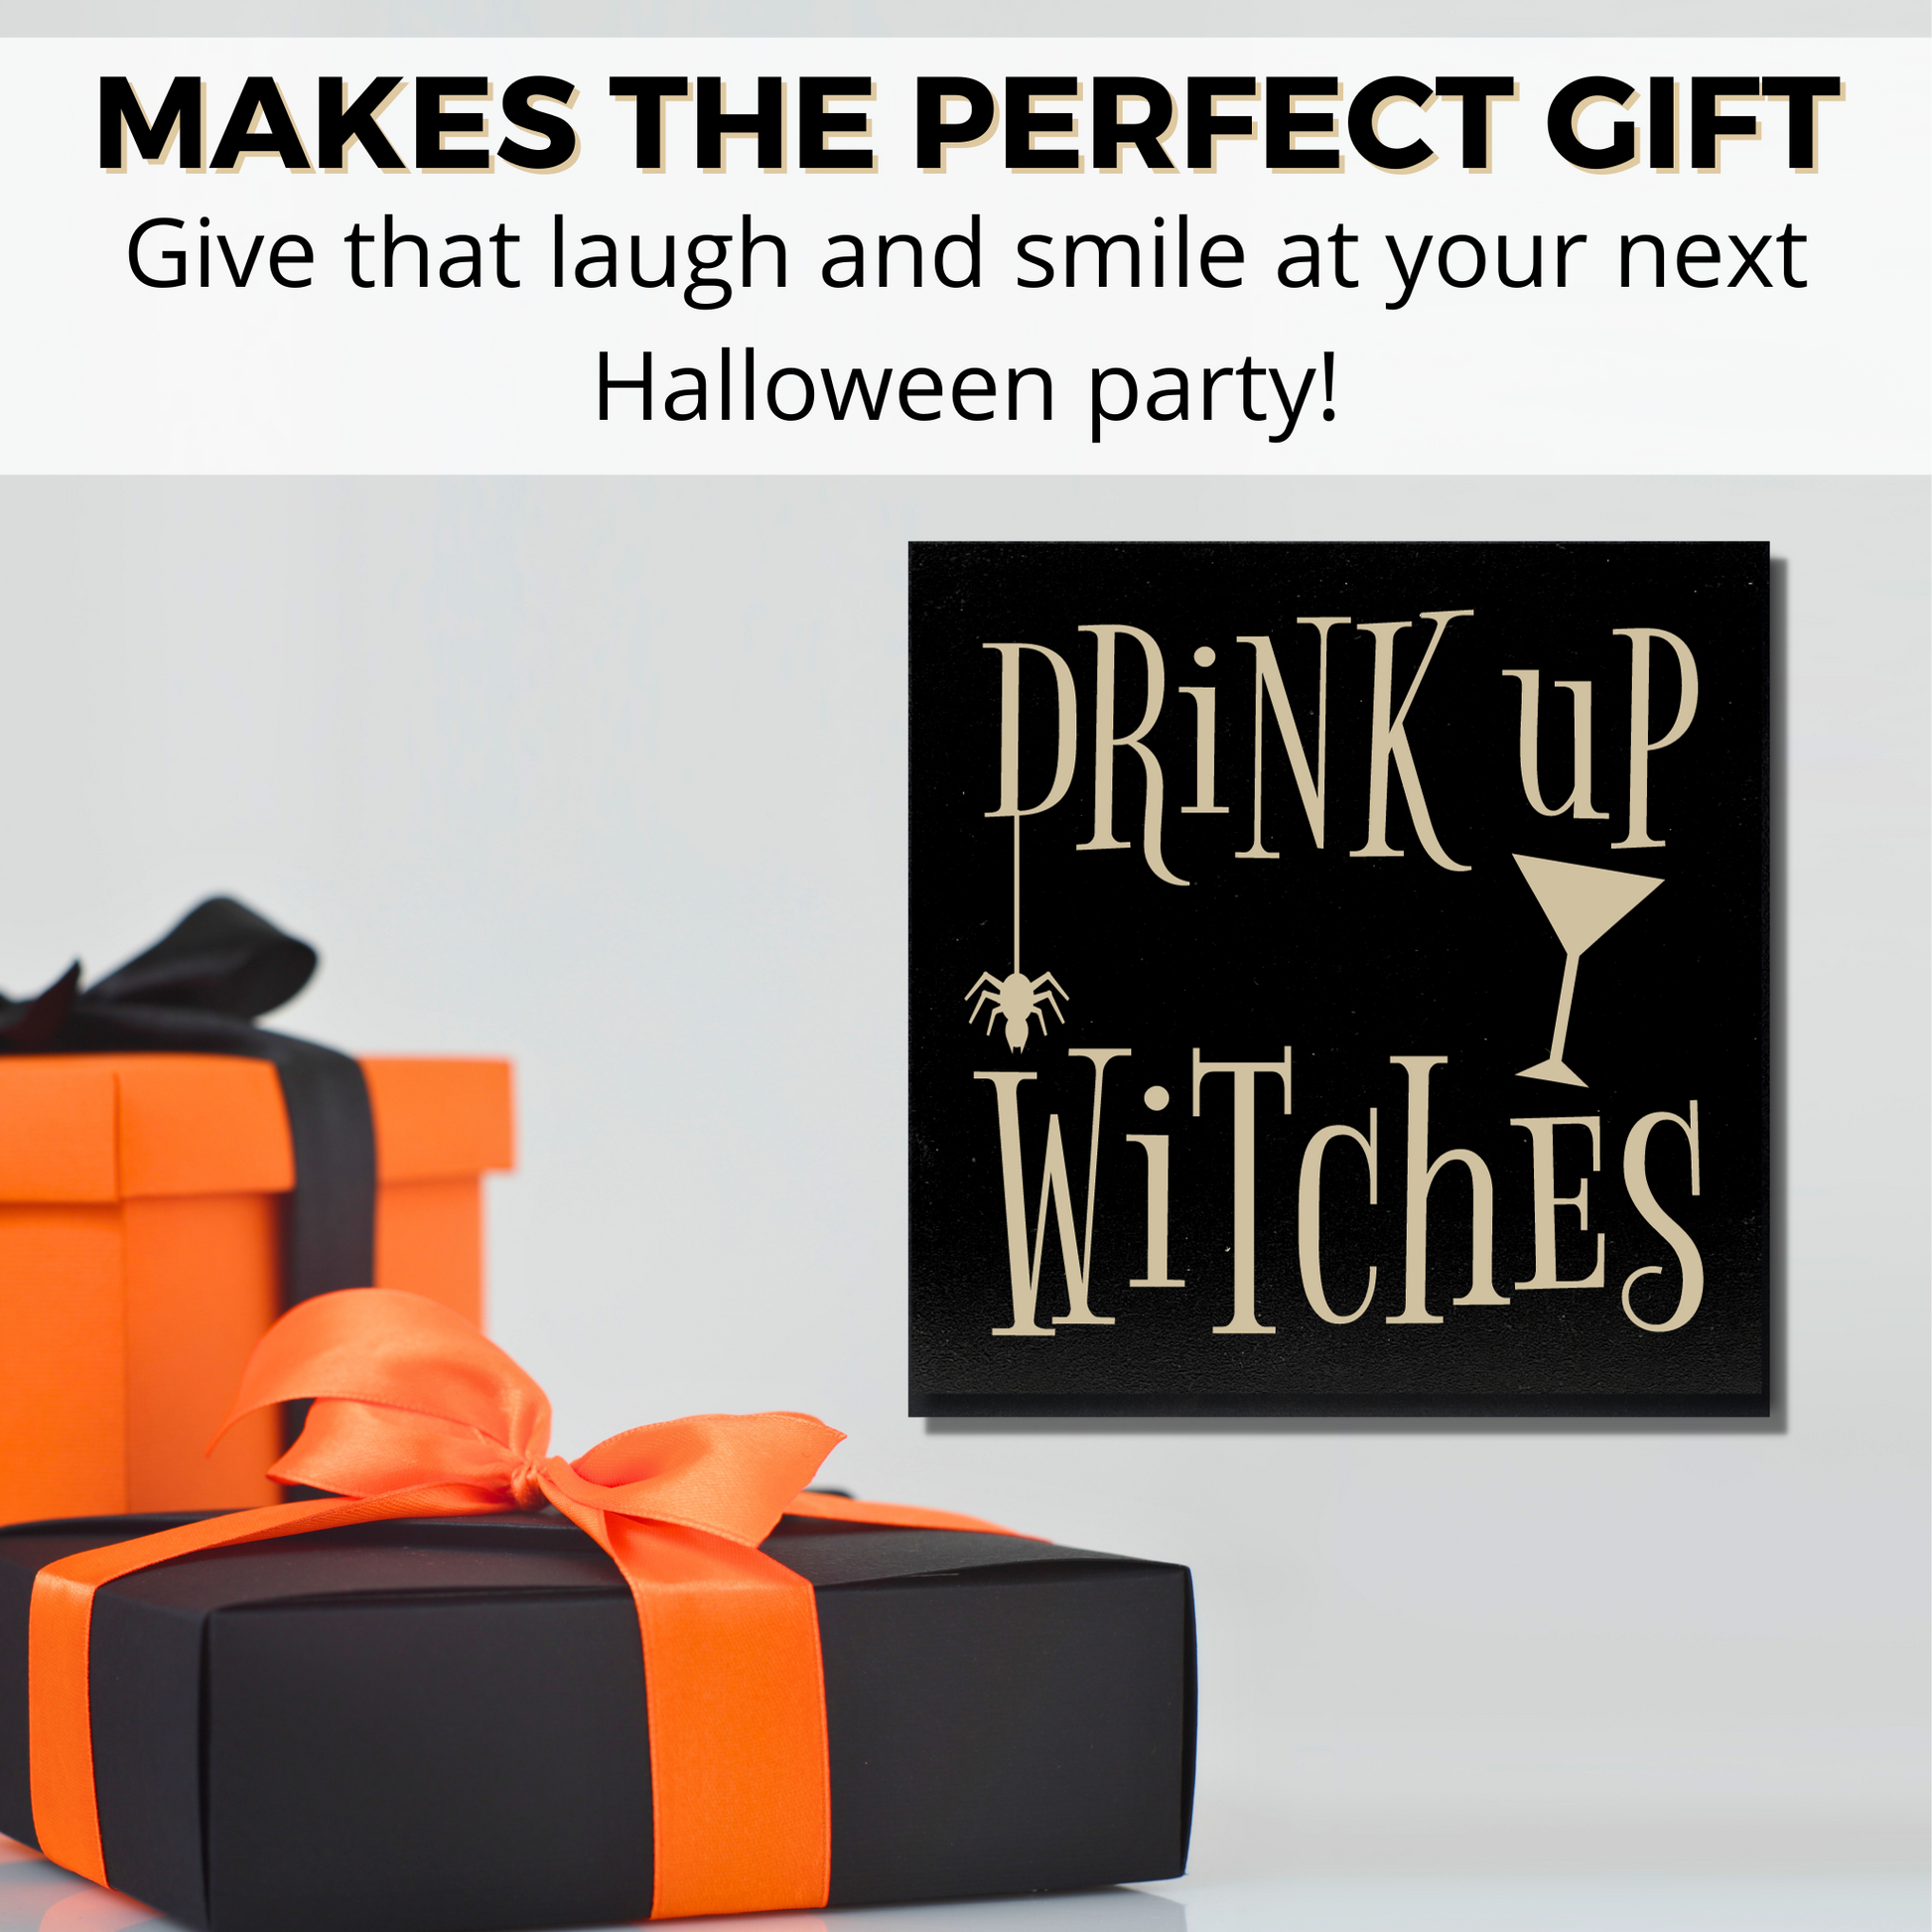 Drink Up Witches Fun Halloween party sign